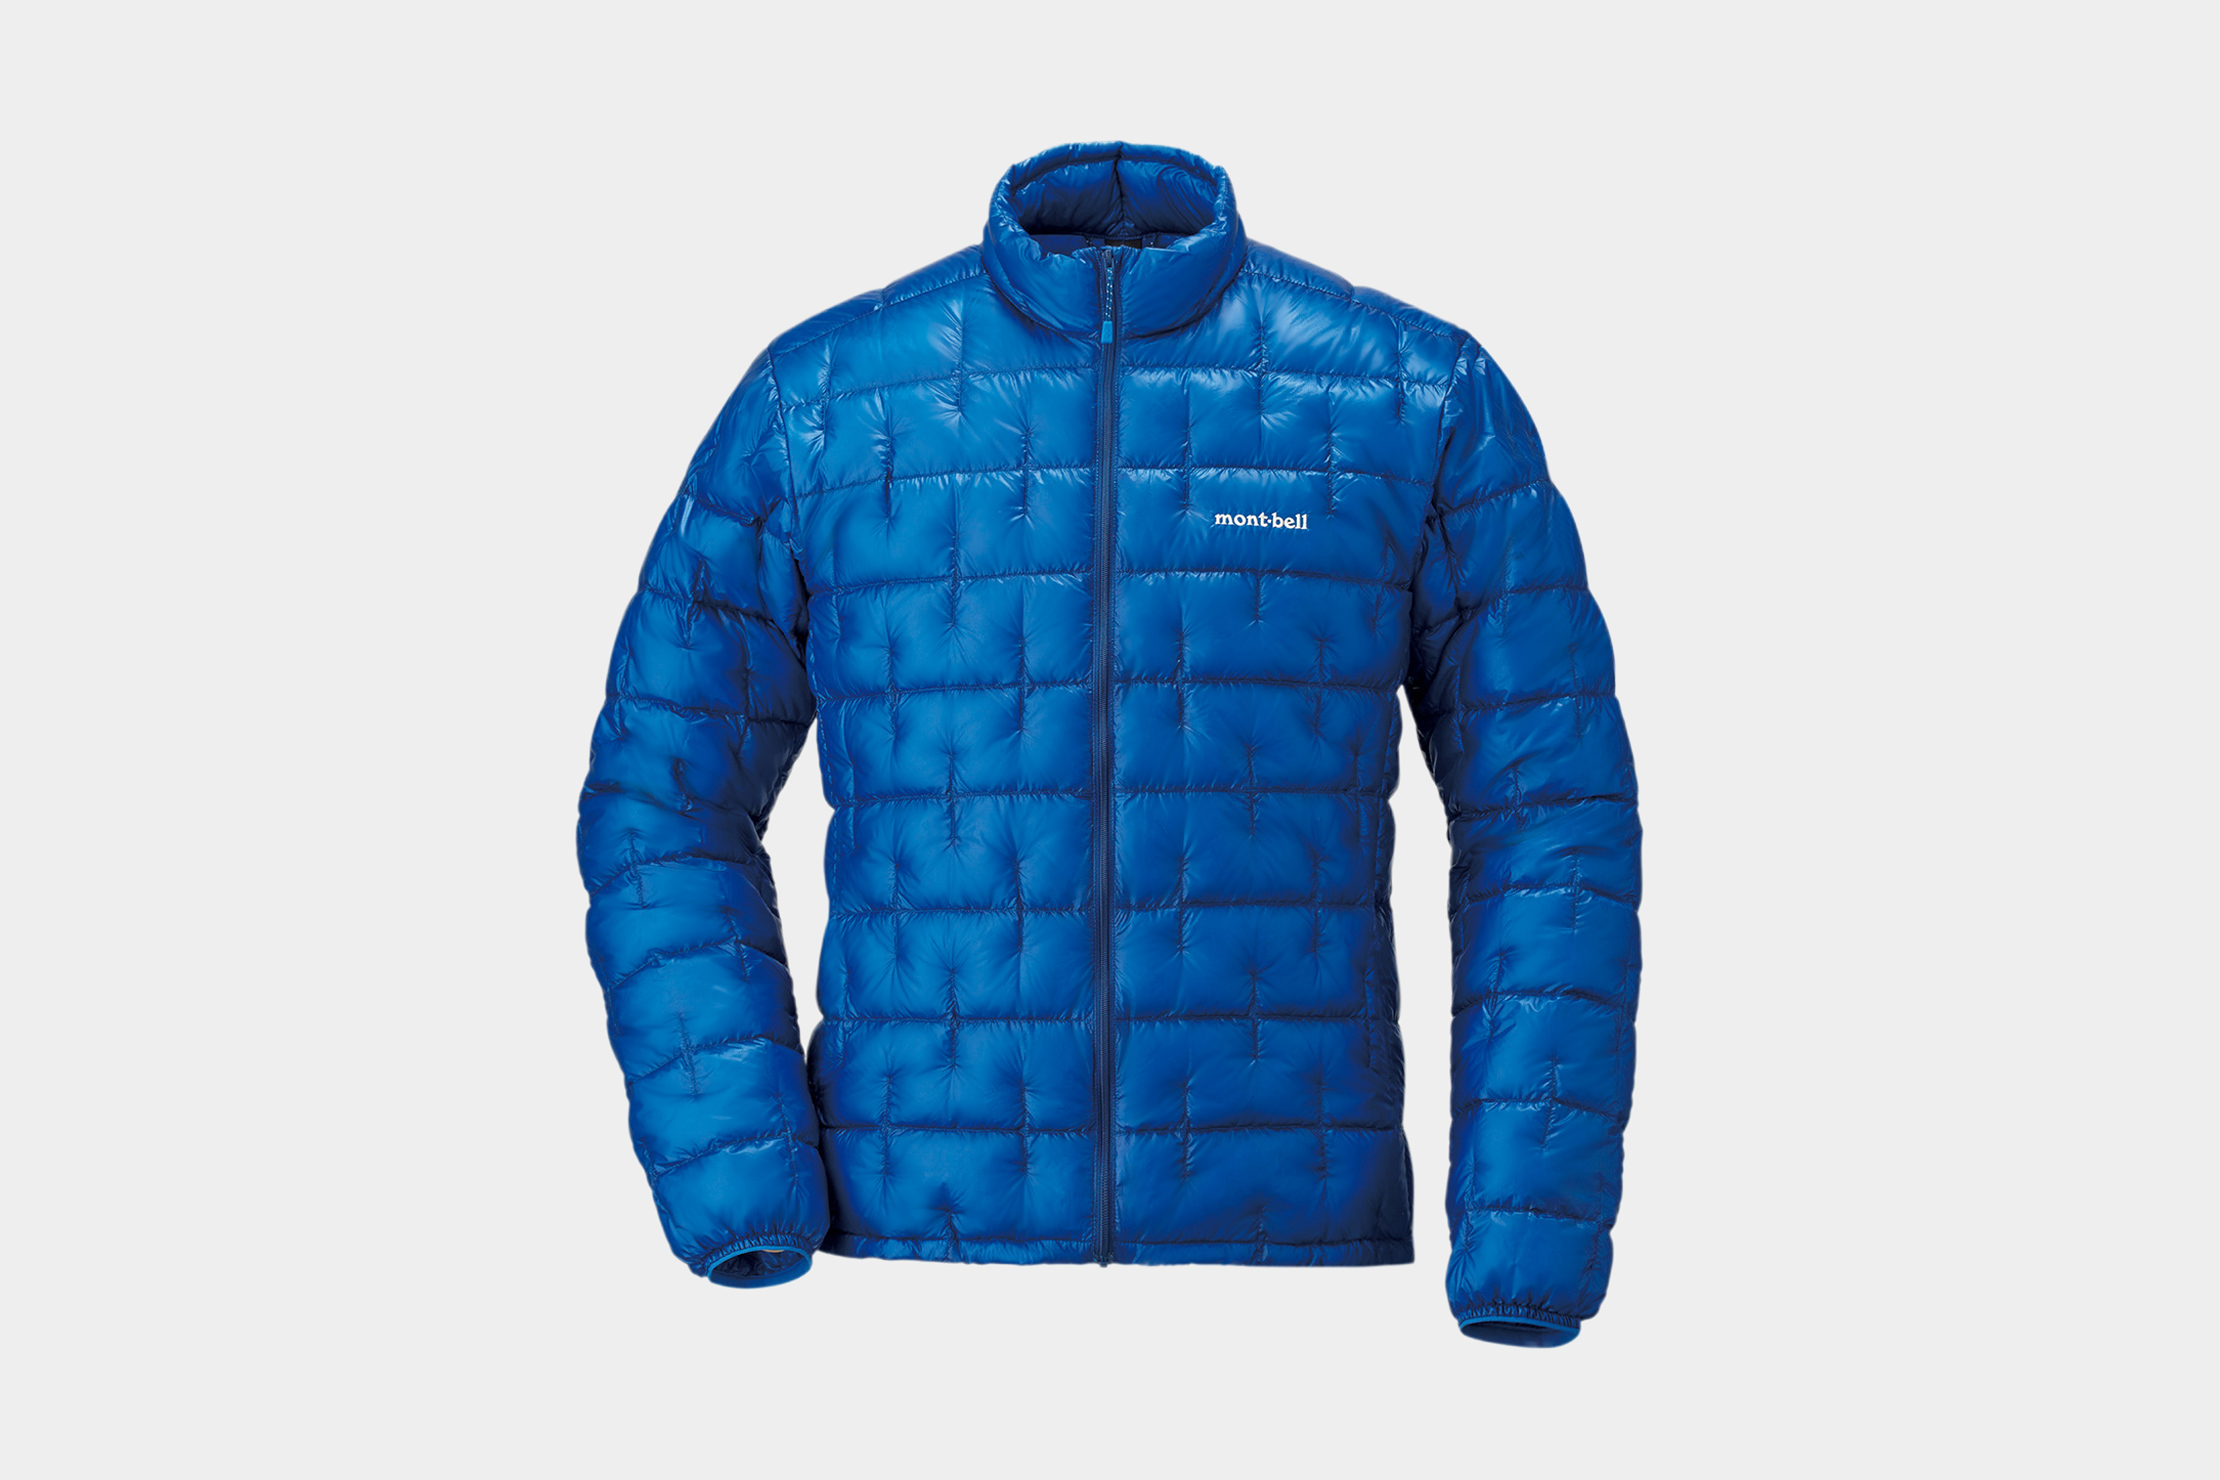 montbell vs north face